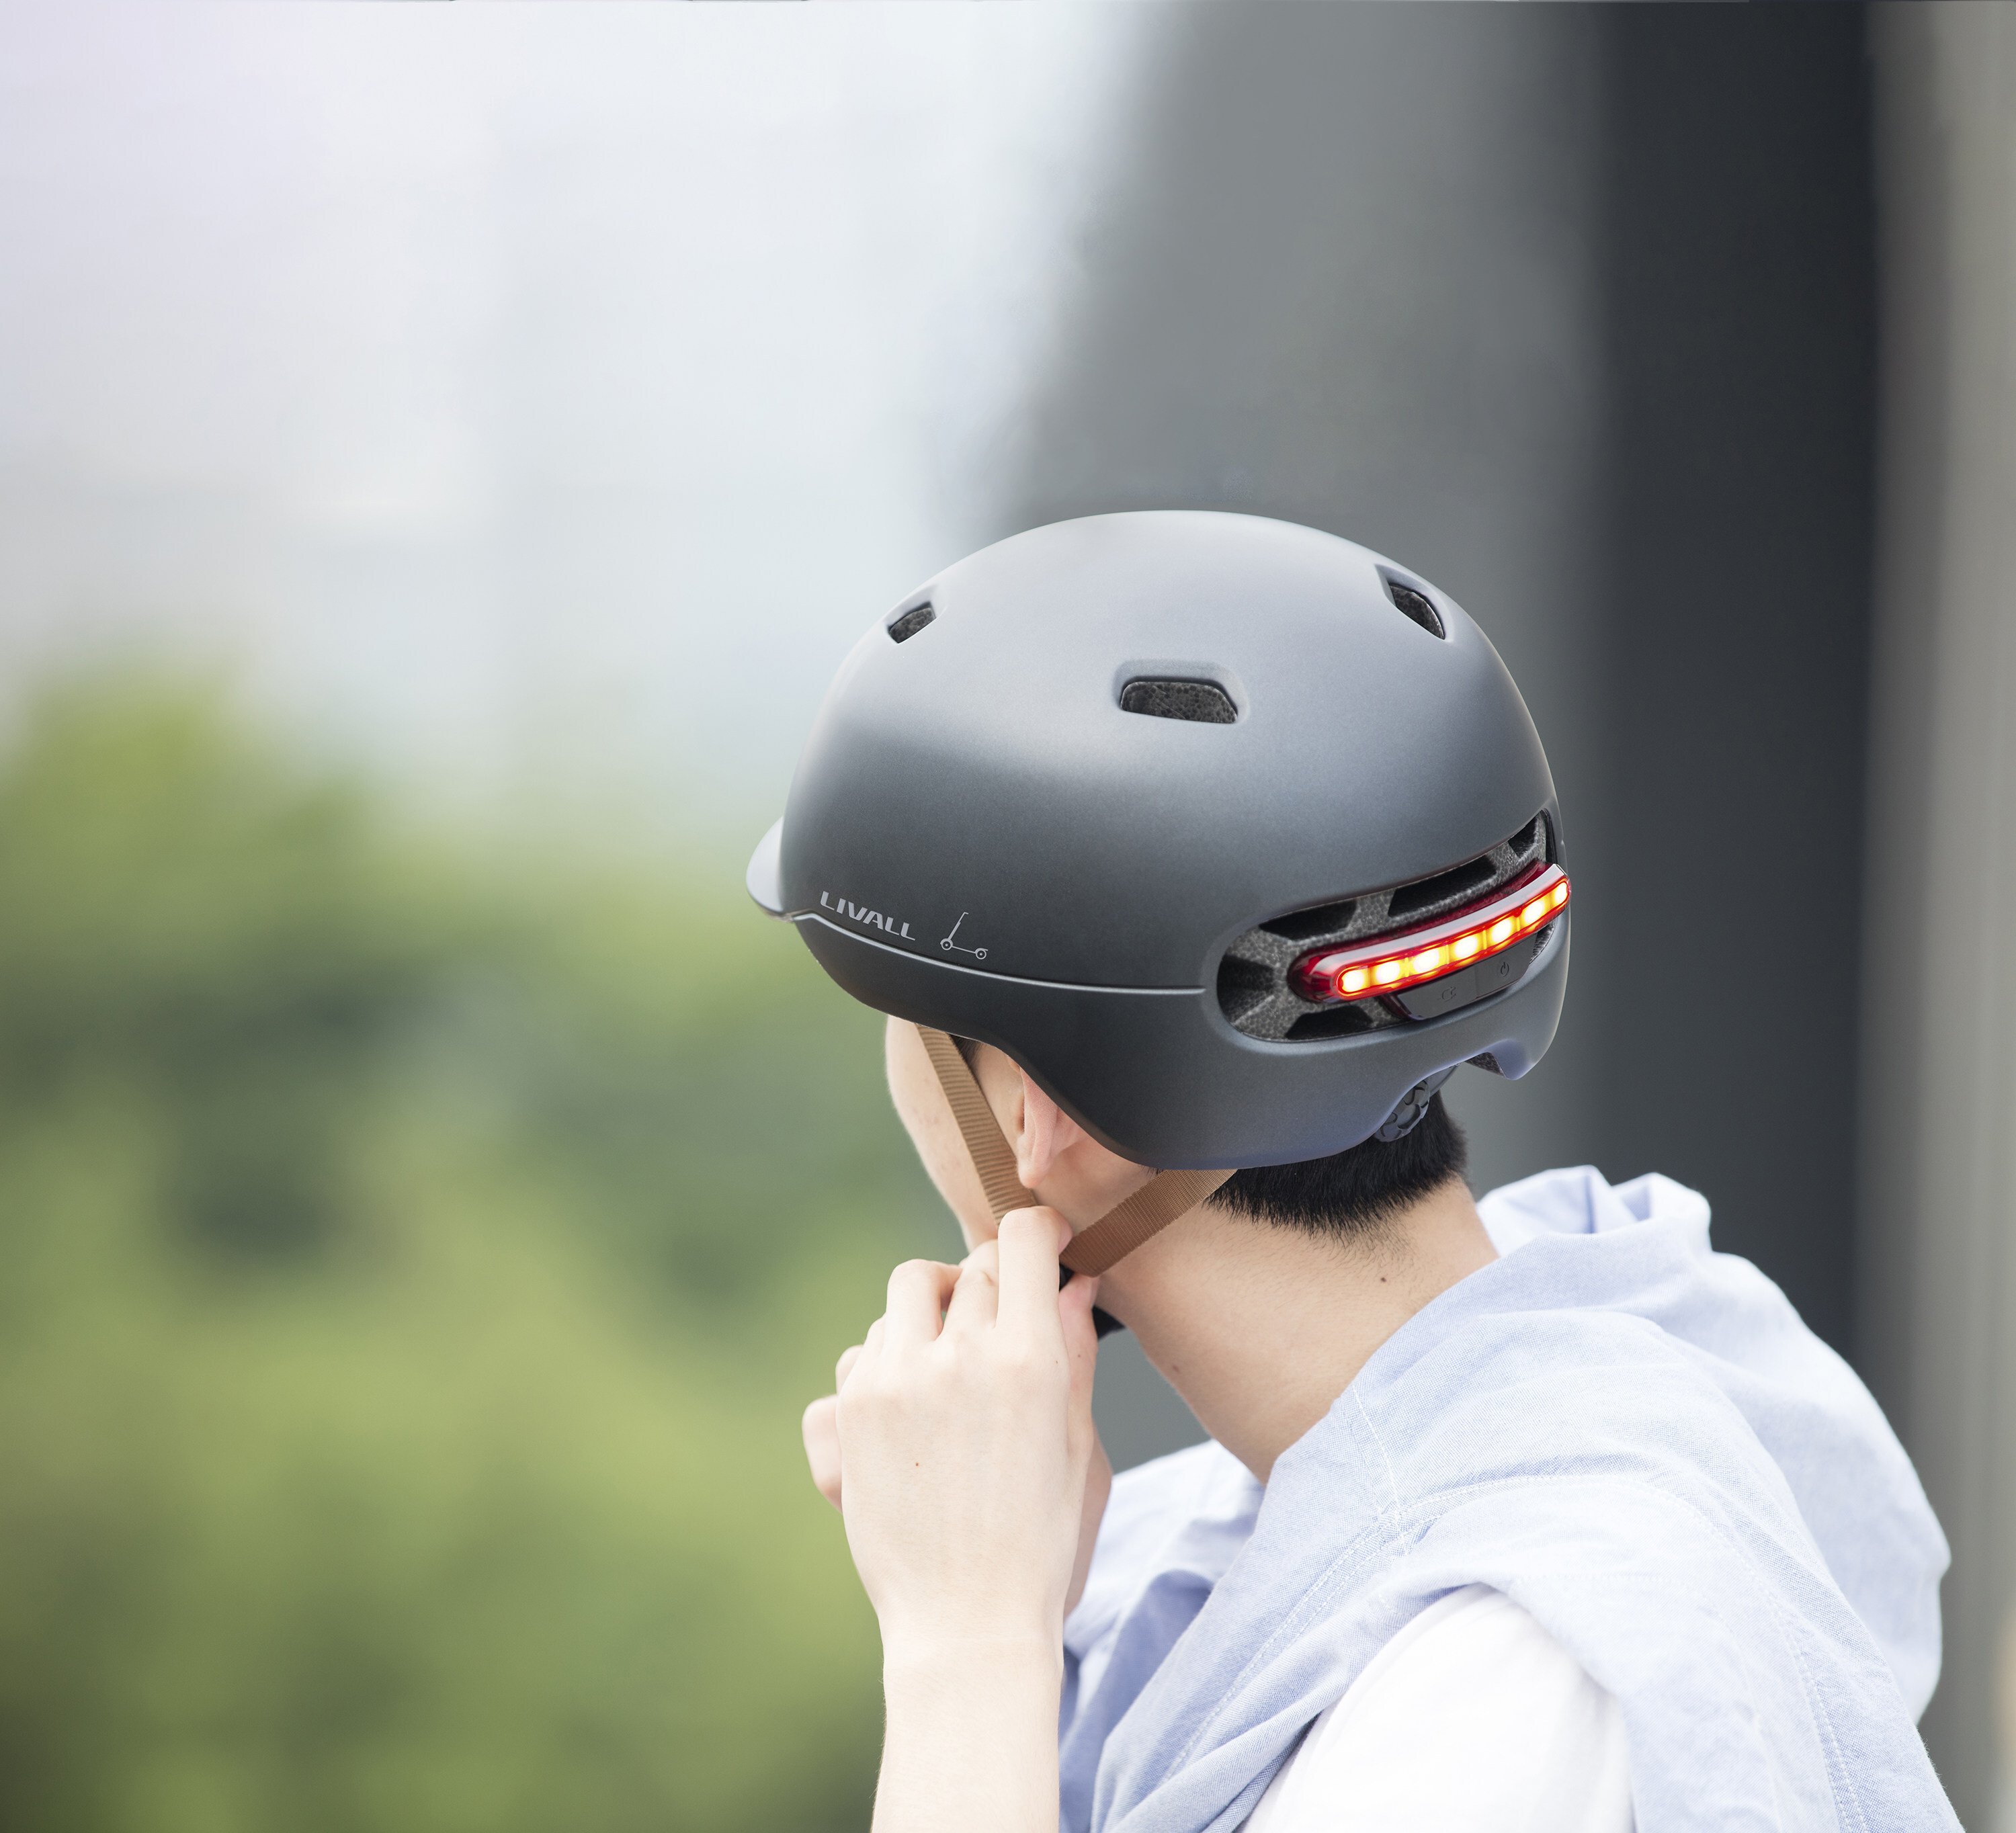 Founded in 2014, Livall started with the manufacture of smart sports helmets before gradually extending production to urban road motorcycle helmets. Photo: Handout